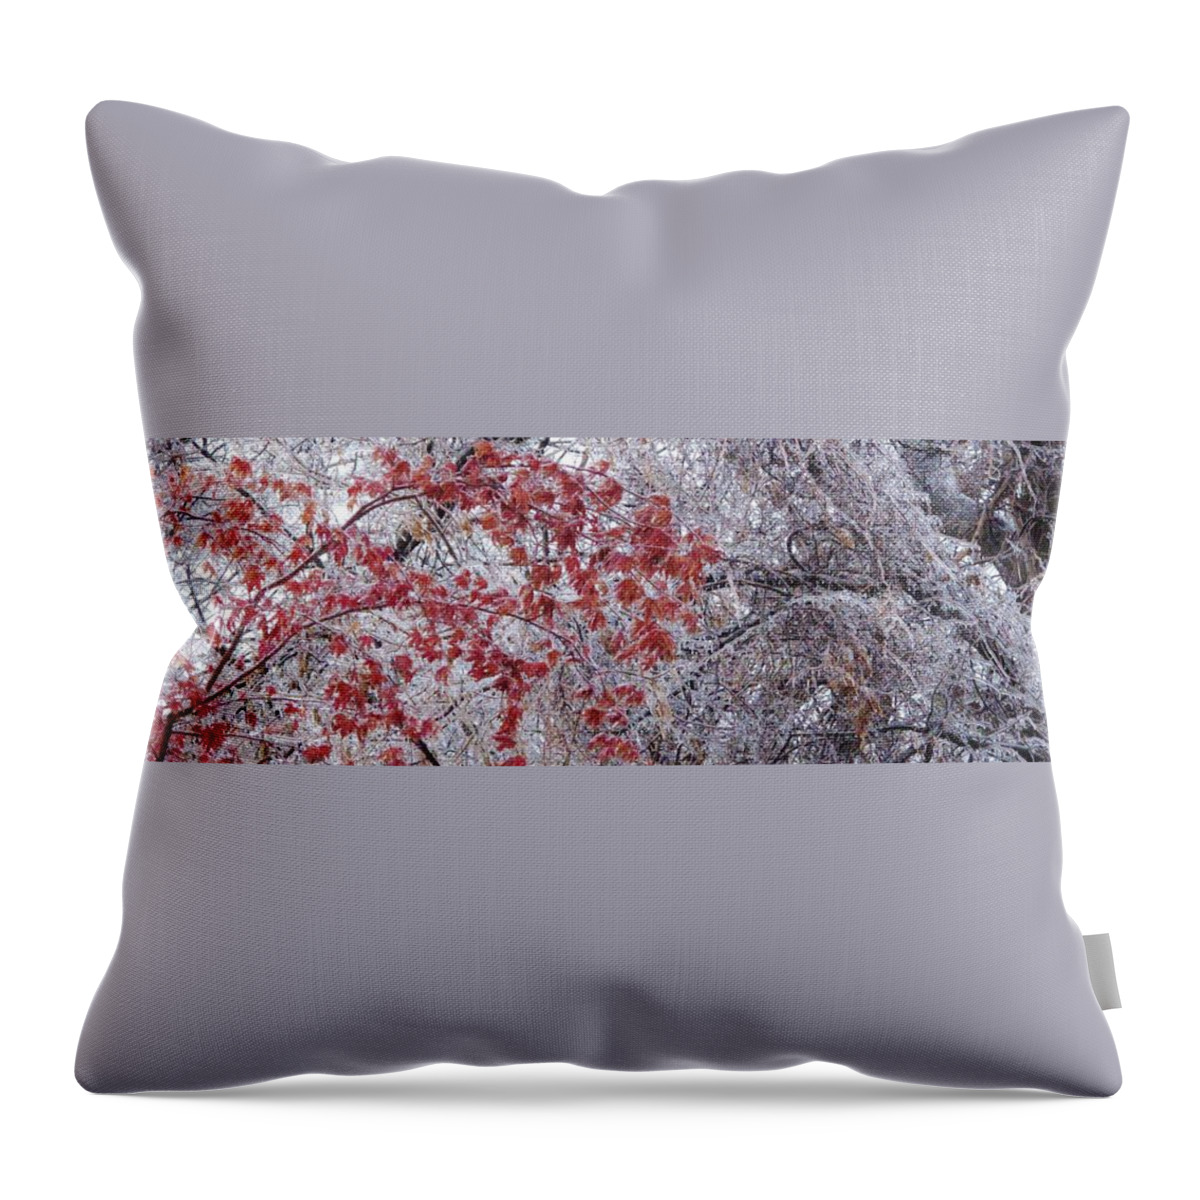 Maple Throw Pillow featuring the photograph Icy Red by Ian MacDonald